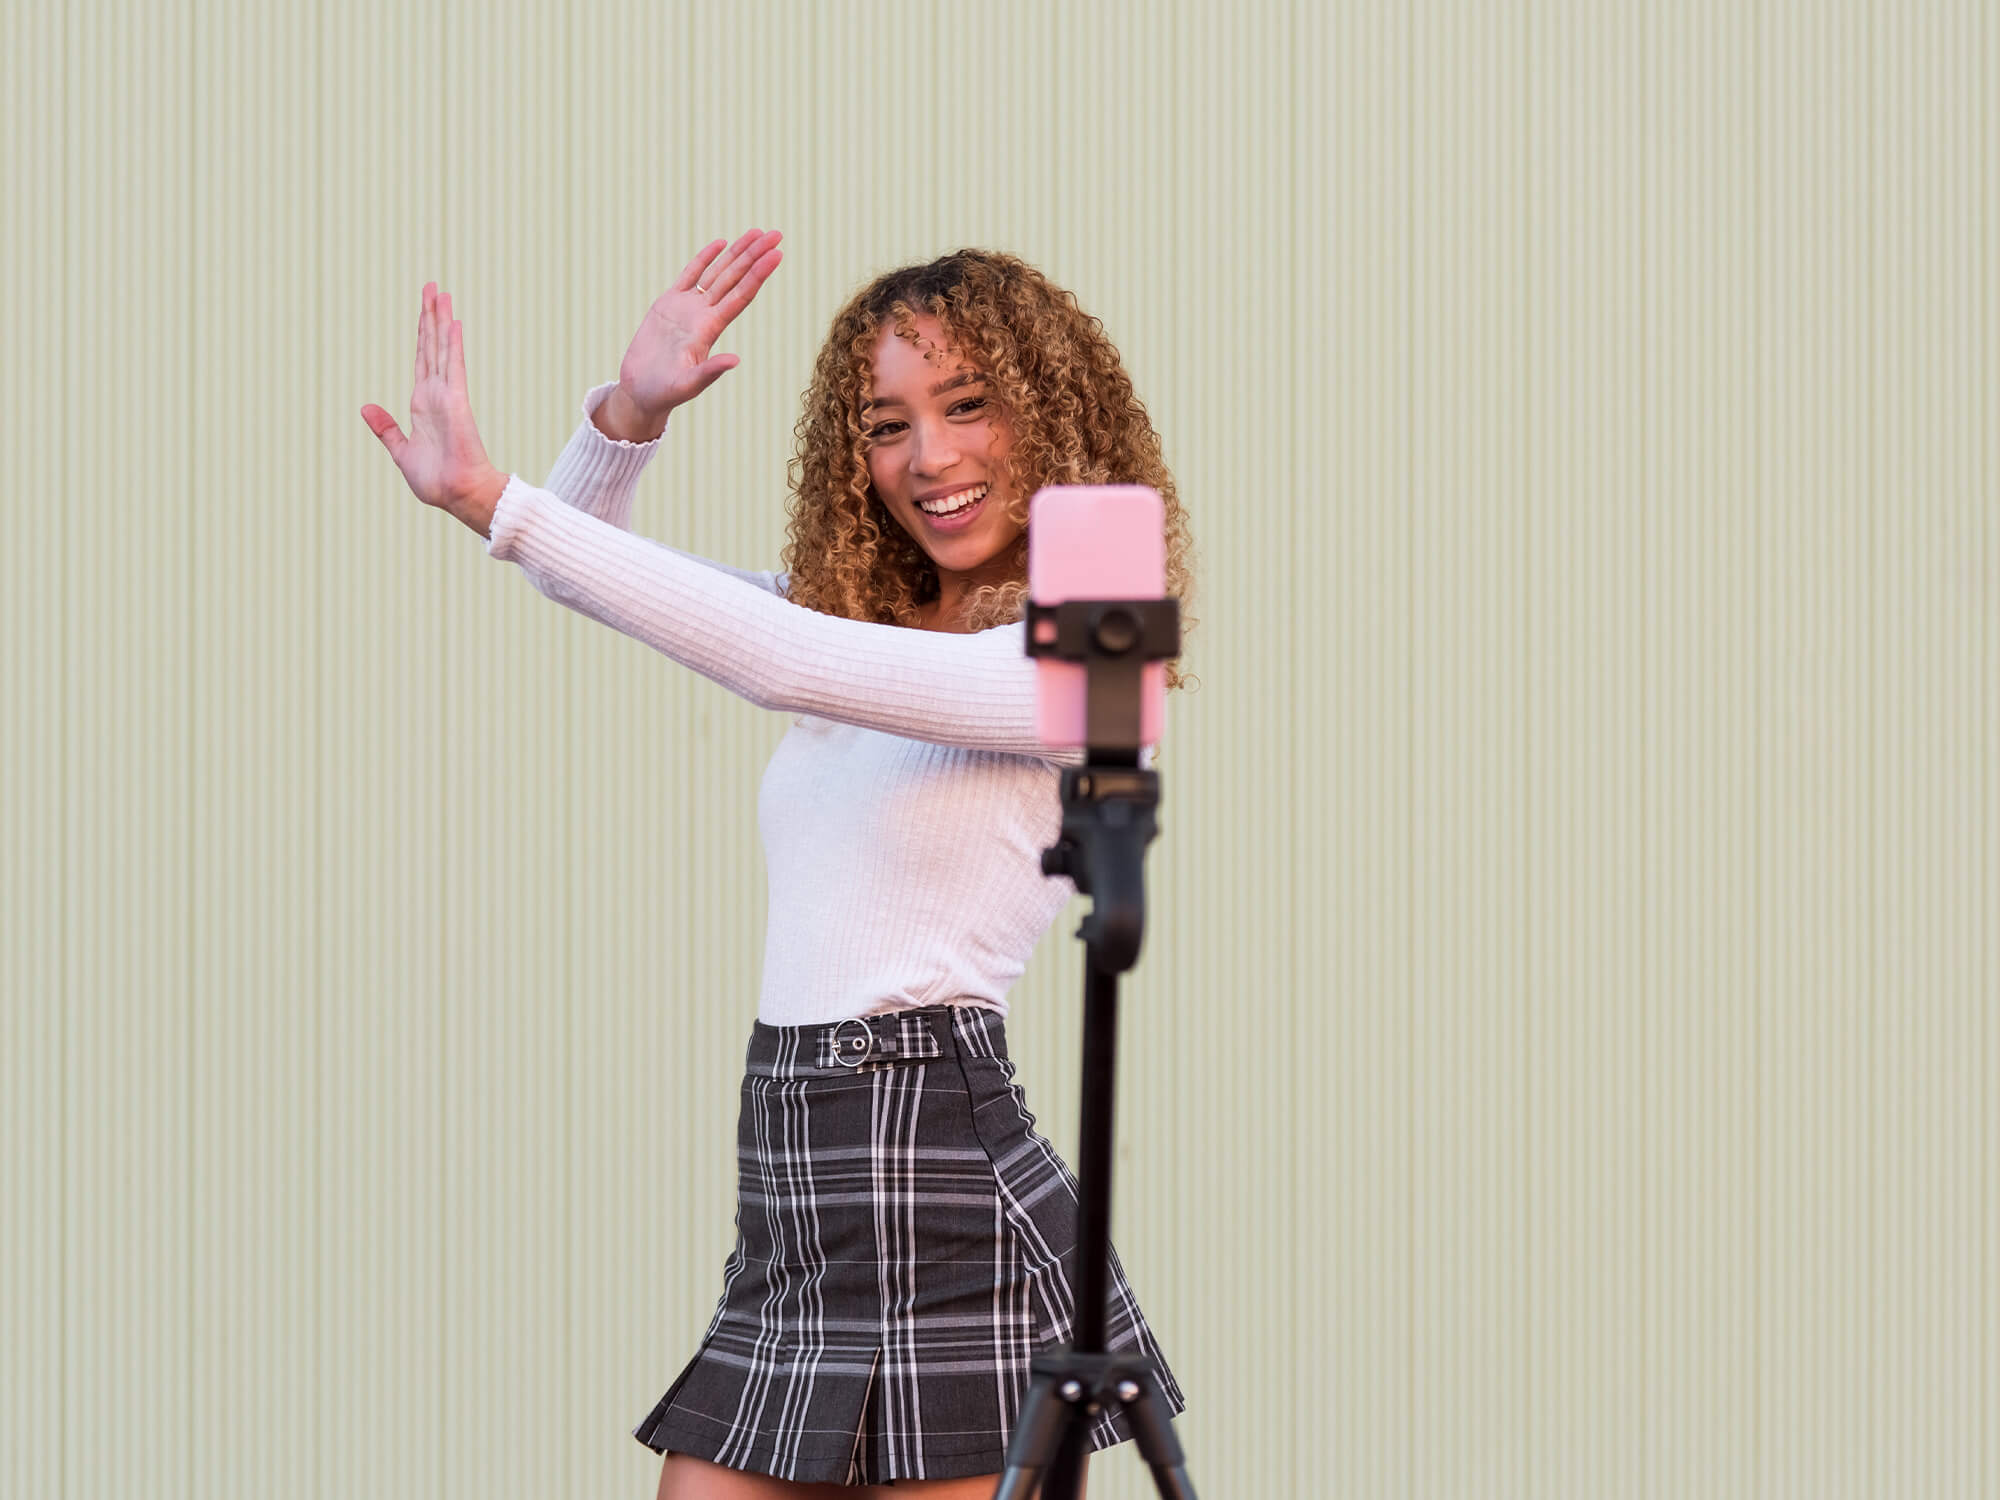 A young woman dancing in front of a phone on a tripod